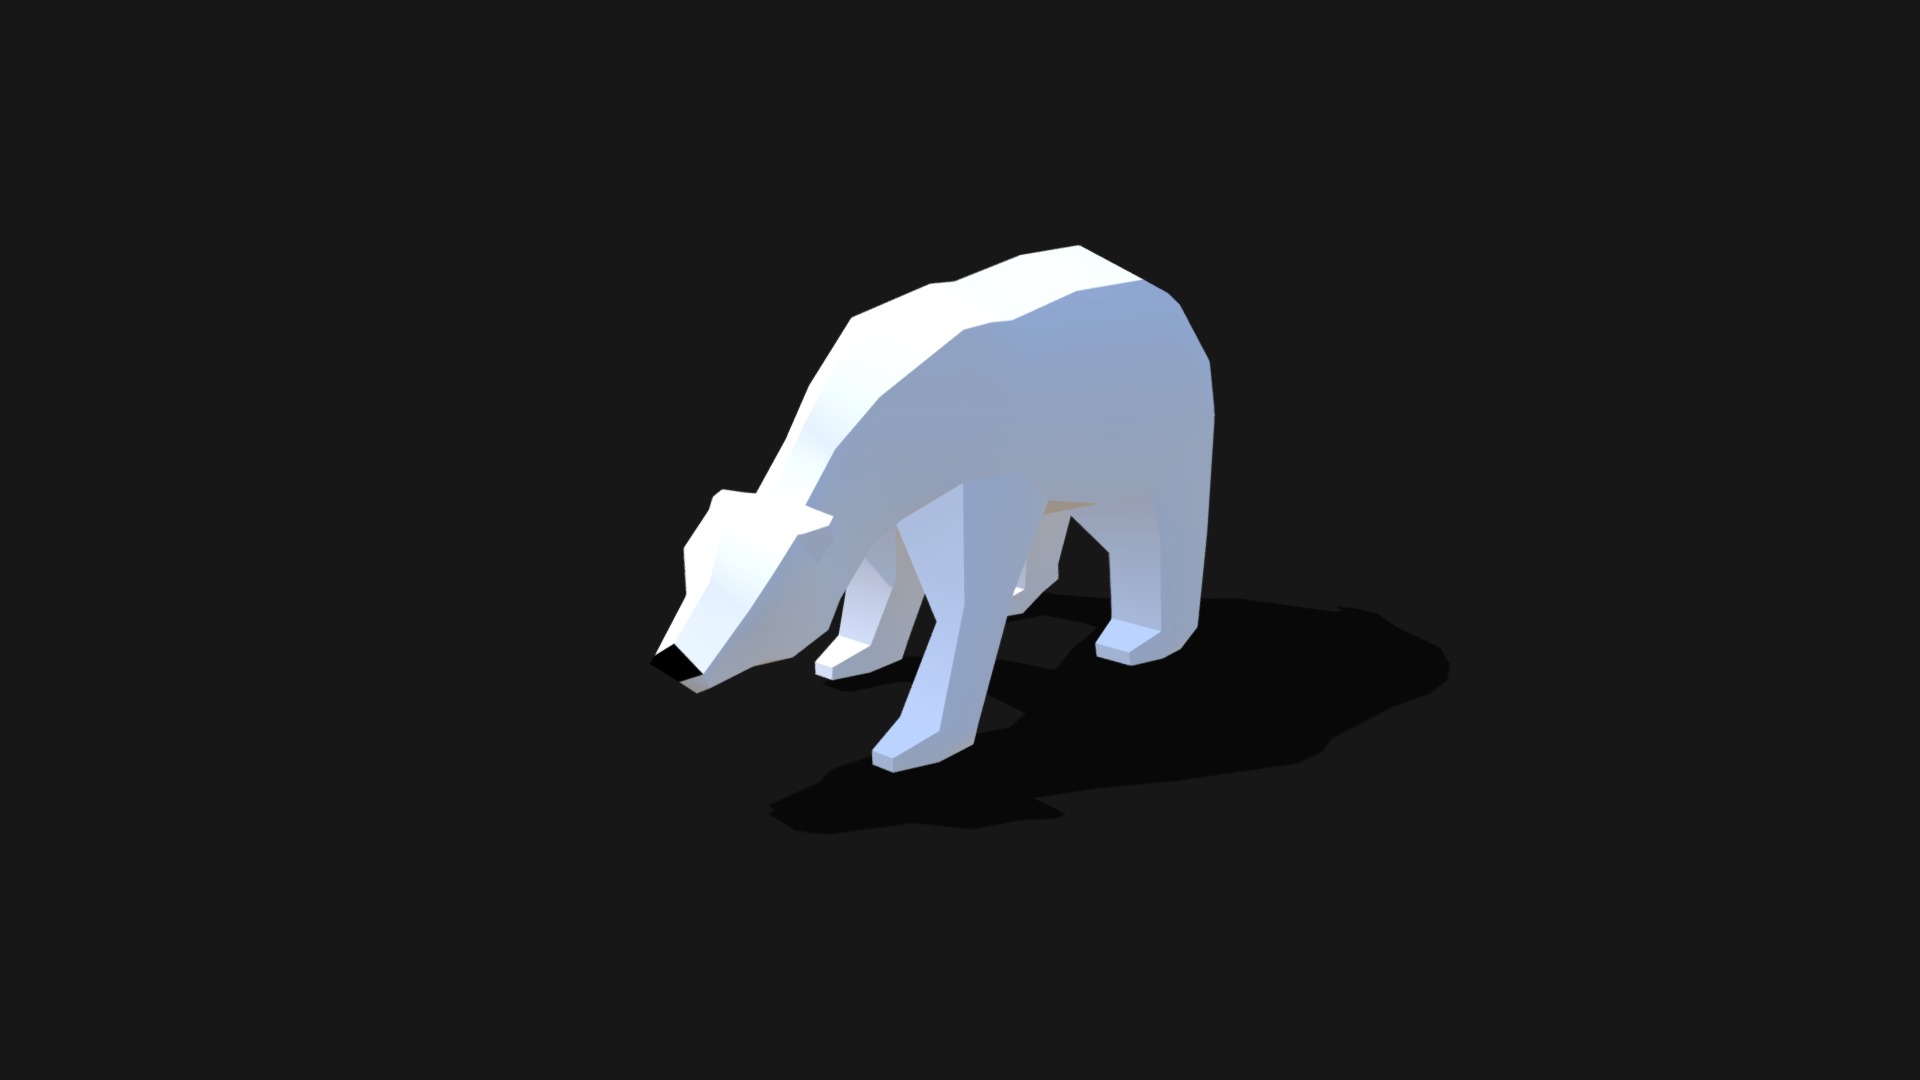 3D model Polar Bear – Lowpoly - This is a 3D model of the Polar Bear - Lowpoly. The 3D model is about a white cube with a black background.